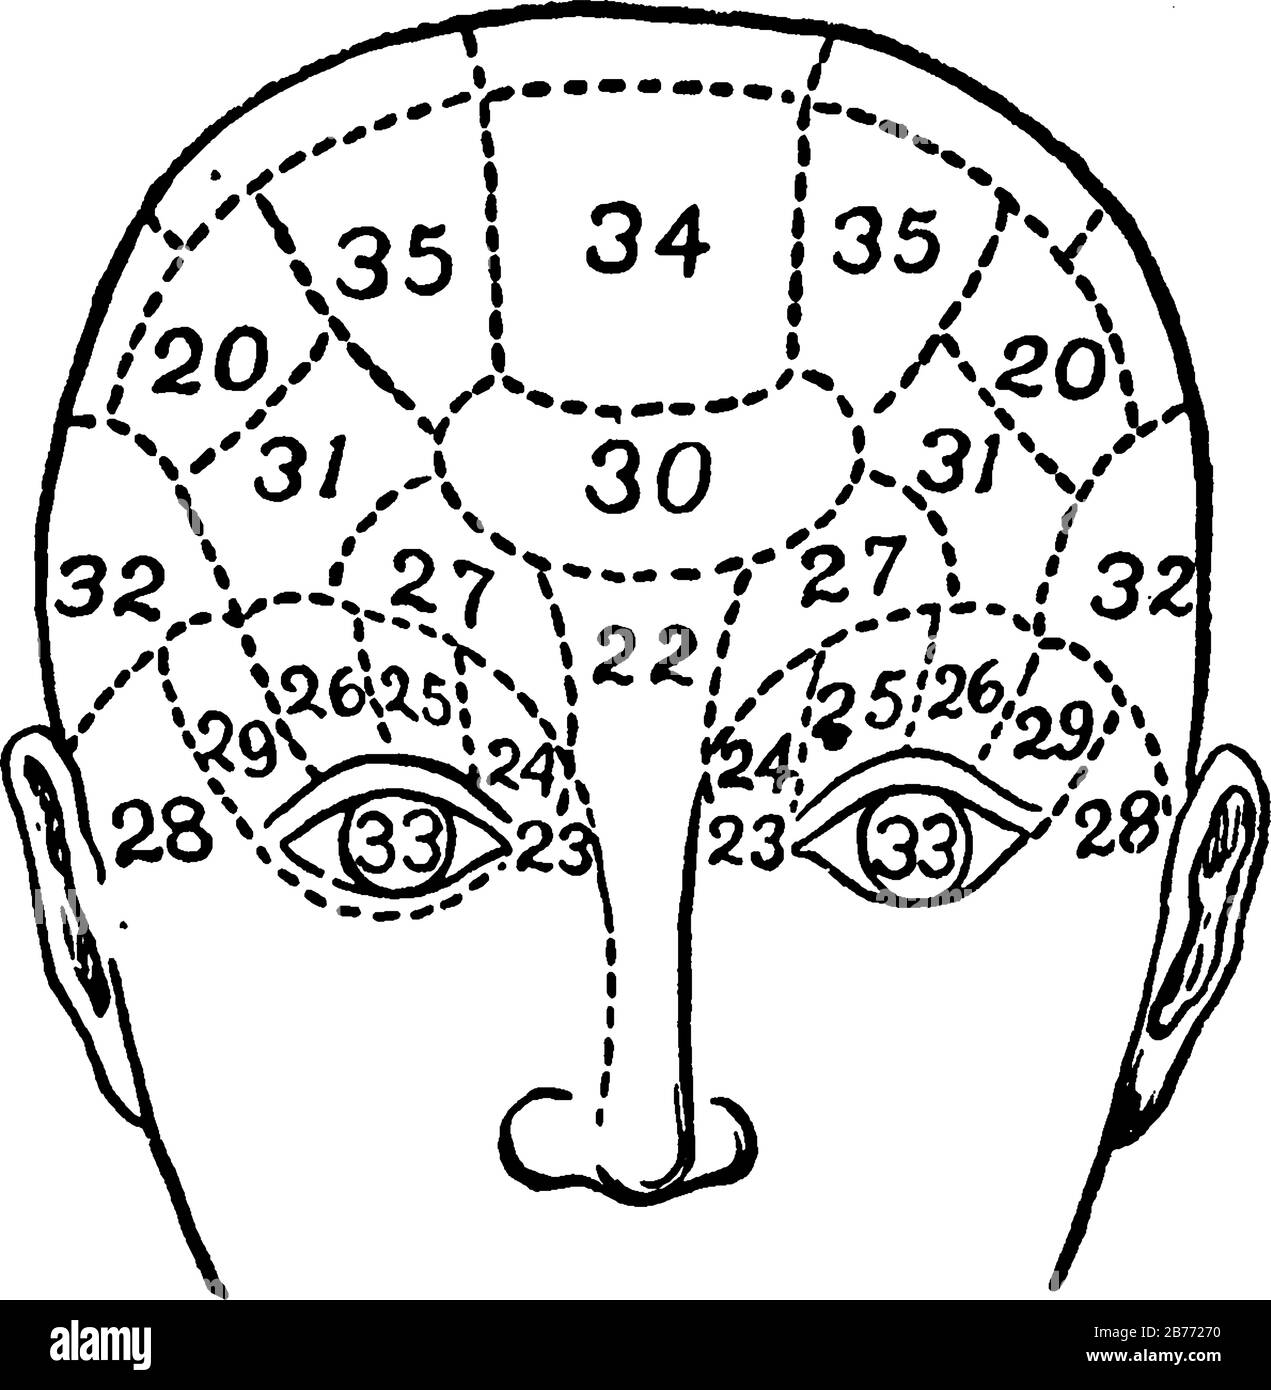 Phrenology is a psychological theory that the shape and bumps on a person's head can tell what mental powers and sentiments the person uses the most. Stock Vector